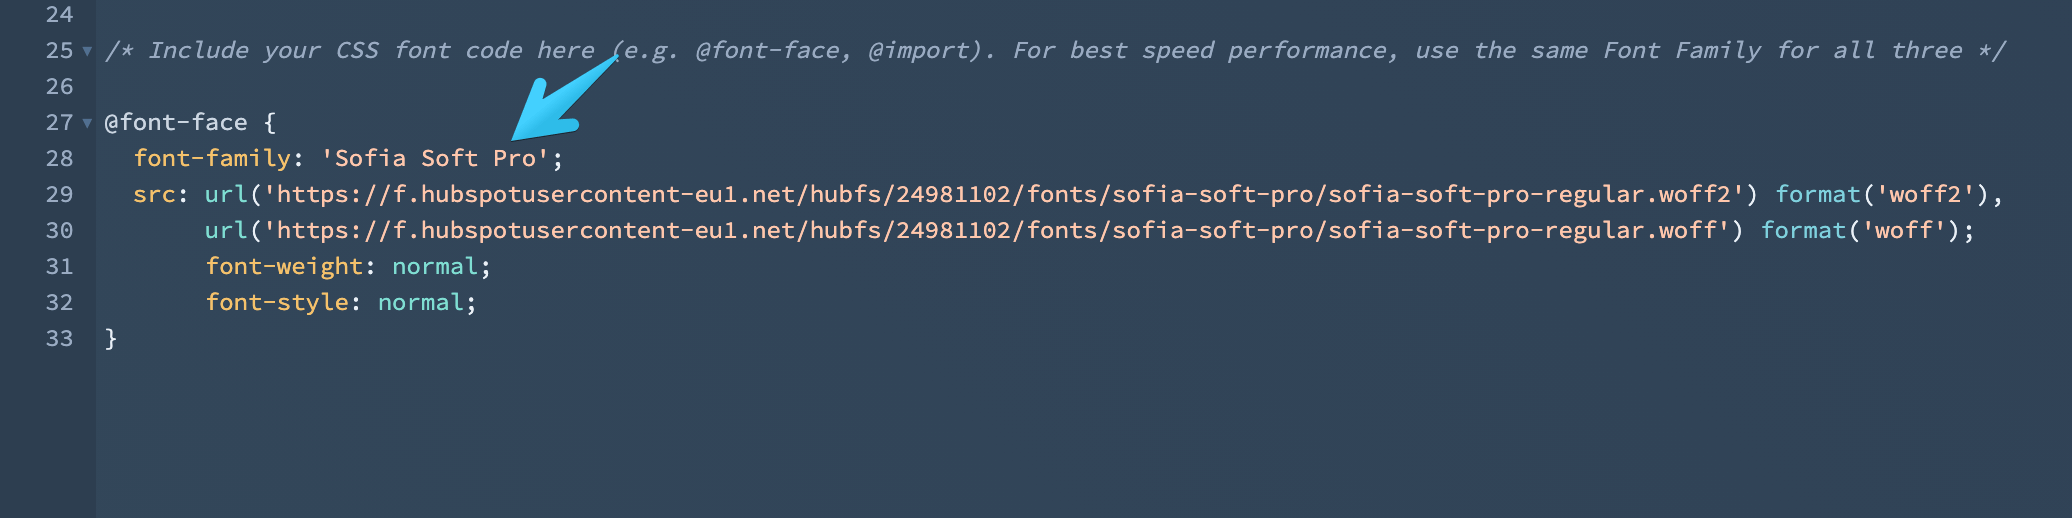 Act3 - Replace font name in the CSS